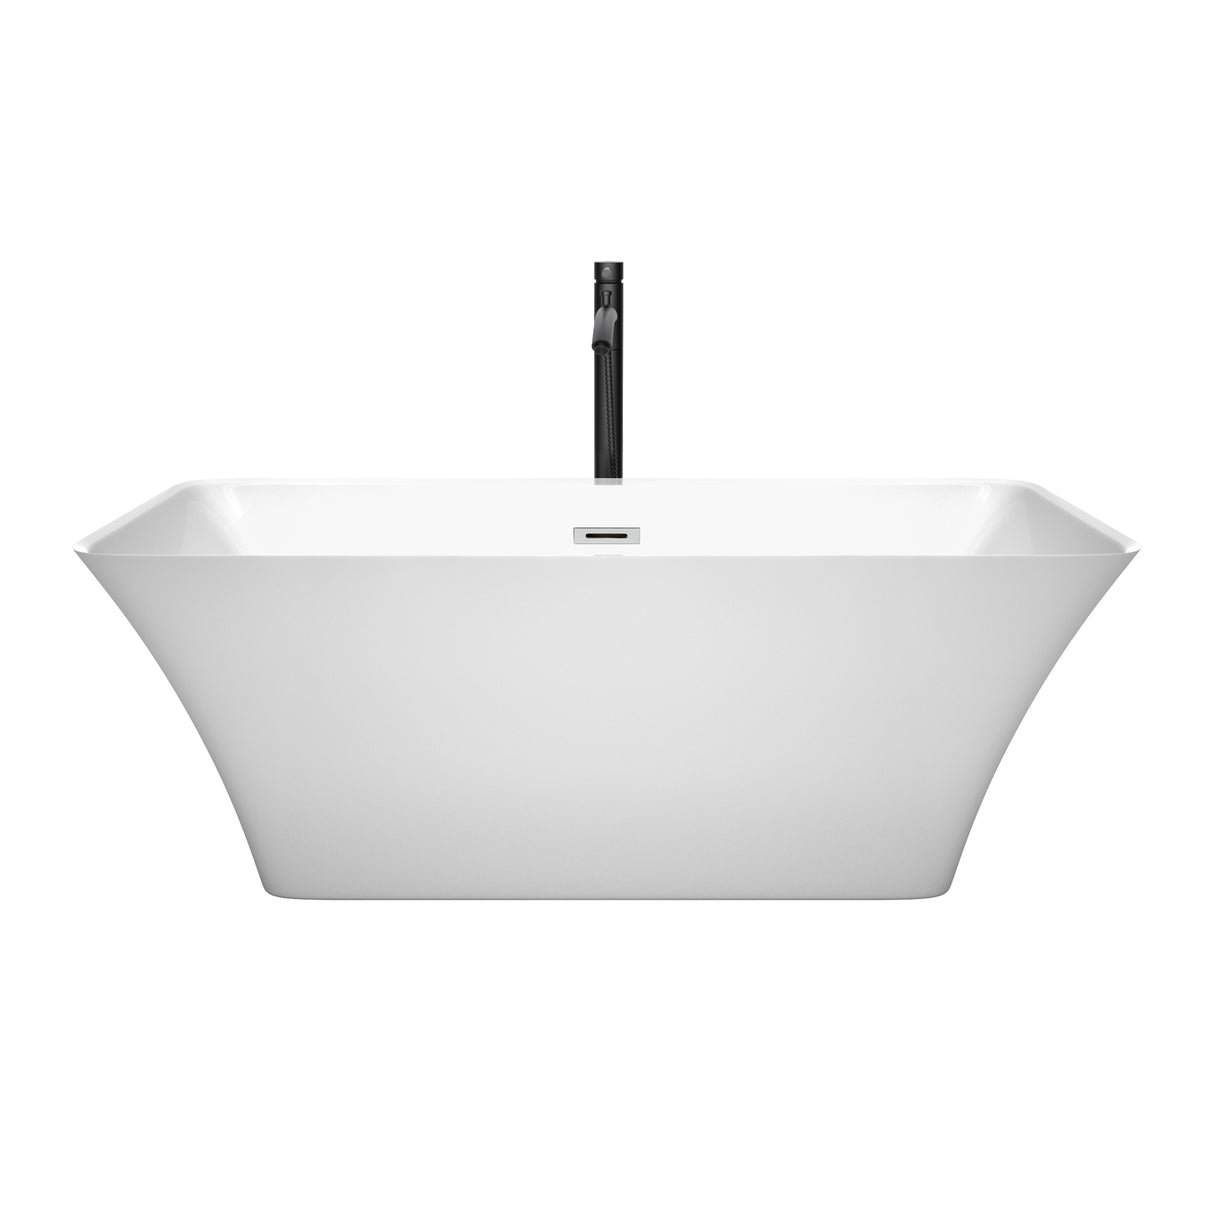 Tiffany 59 Inch Freestanding Bathtub in White with Polished Chrome Trim and Floor Mounted Faucet in Matte Black